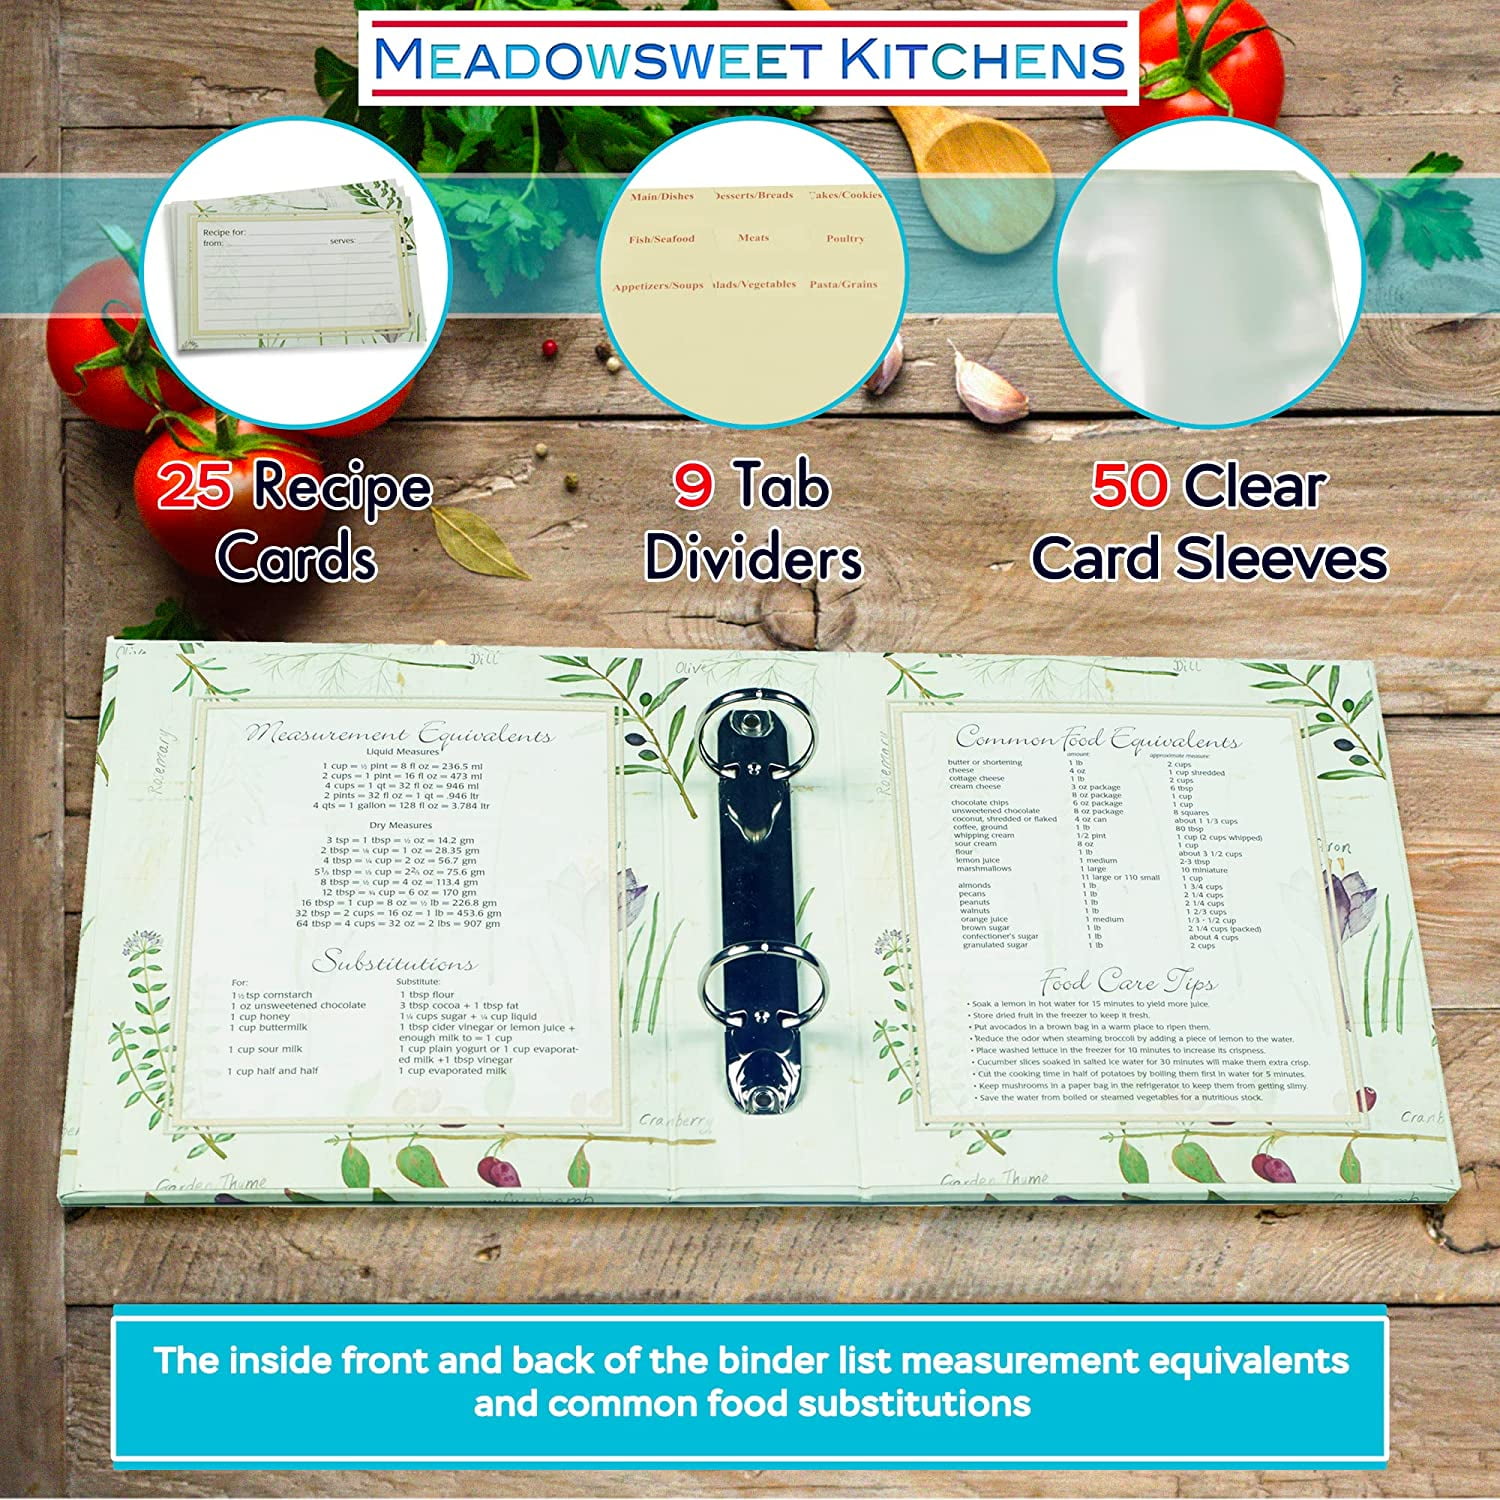  Meadowsweet Kitchens Vintage 4x6 Recipe Card Sheet Protectors  for 9x12 3 Ring Binder - Recipe Card Holder, Paper Protector Sheets for  Recipe Cards 4x6 : Office Products